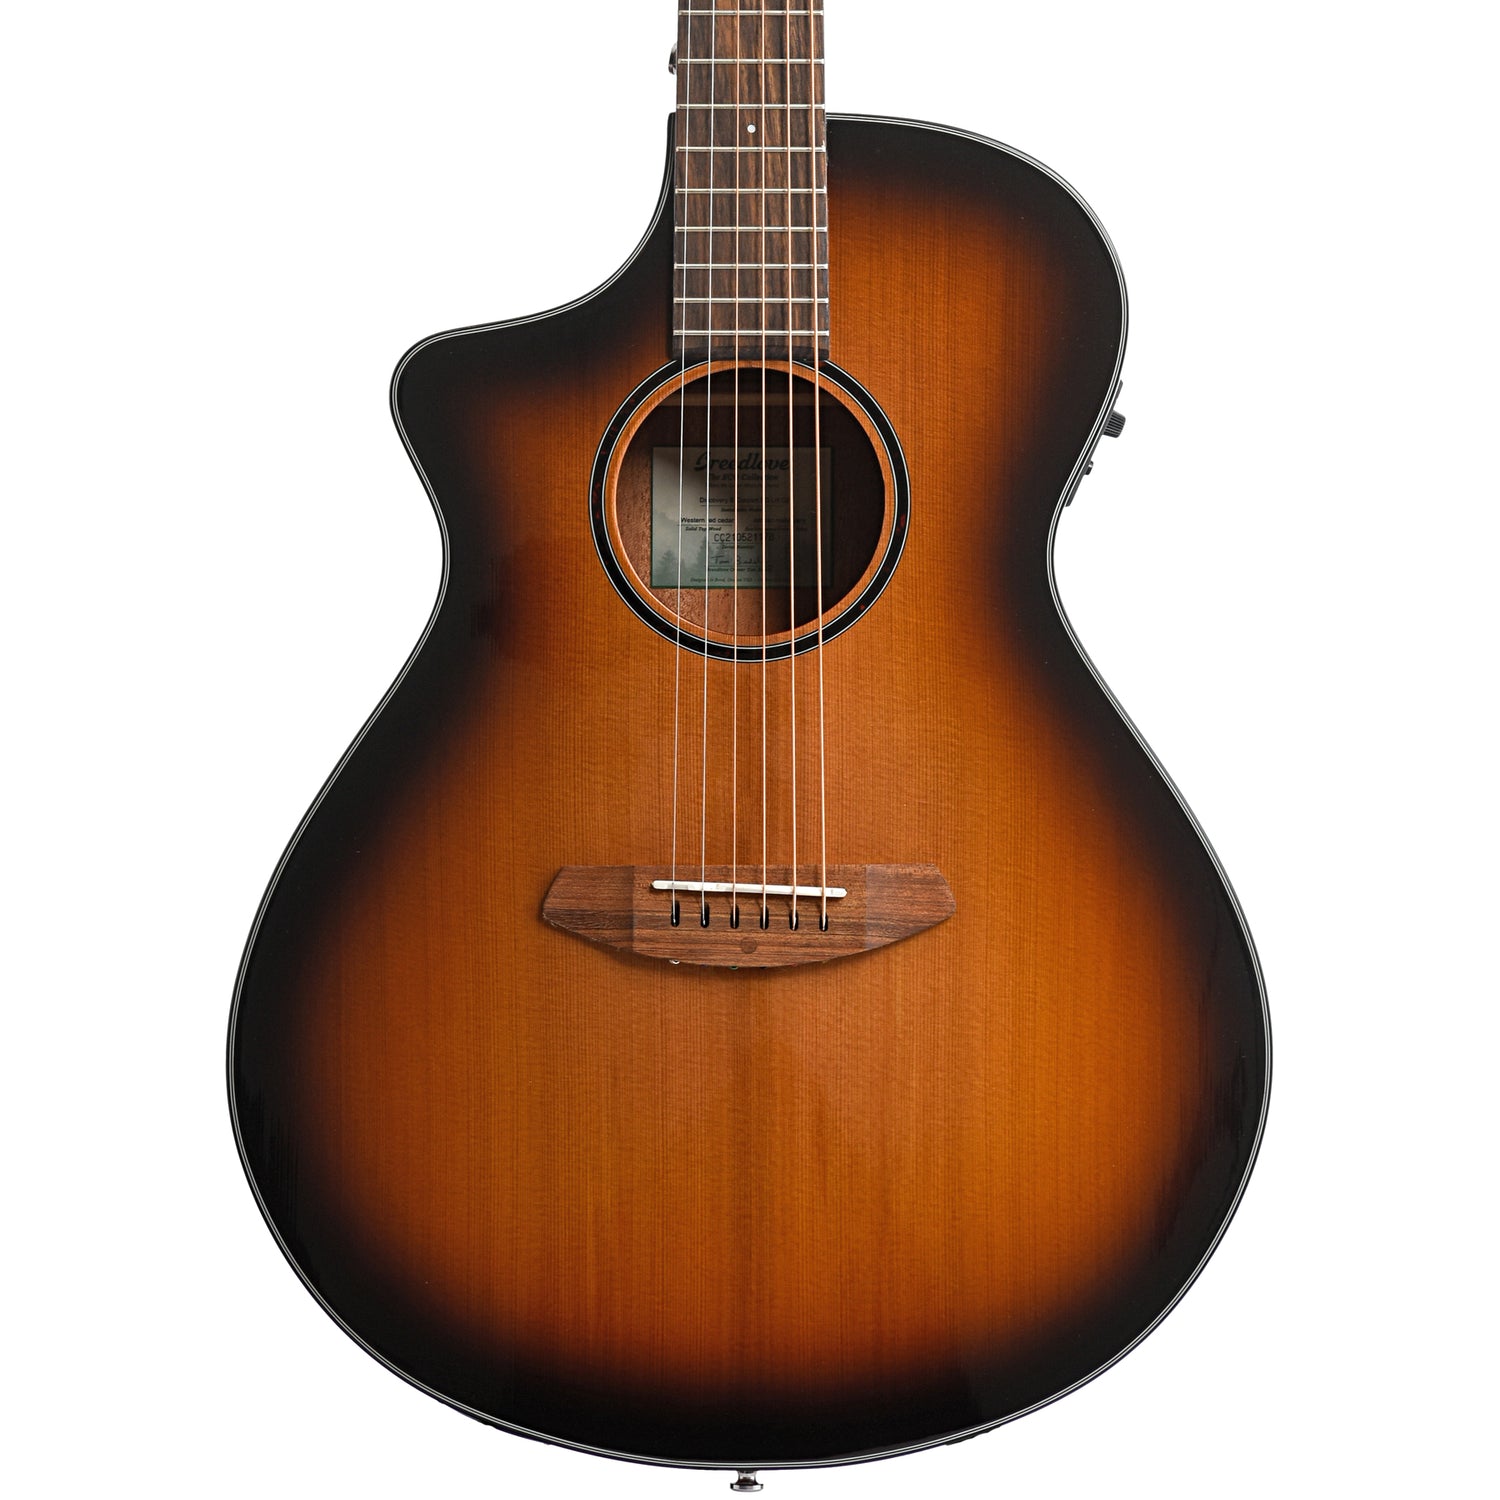 Image 3 of Breedlove Discovery S Concert Edgeburst Left-handed CE Red Cedar-African Mahogany Acoustic-Electric Guitar - SKU# DSCN44LCERCAM : Product Type Flat-top Guitars : Elderly Instruments